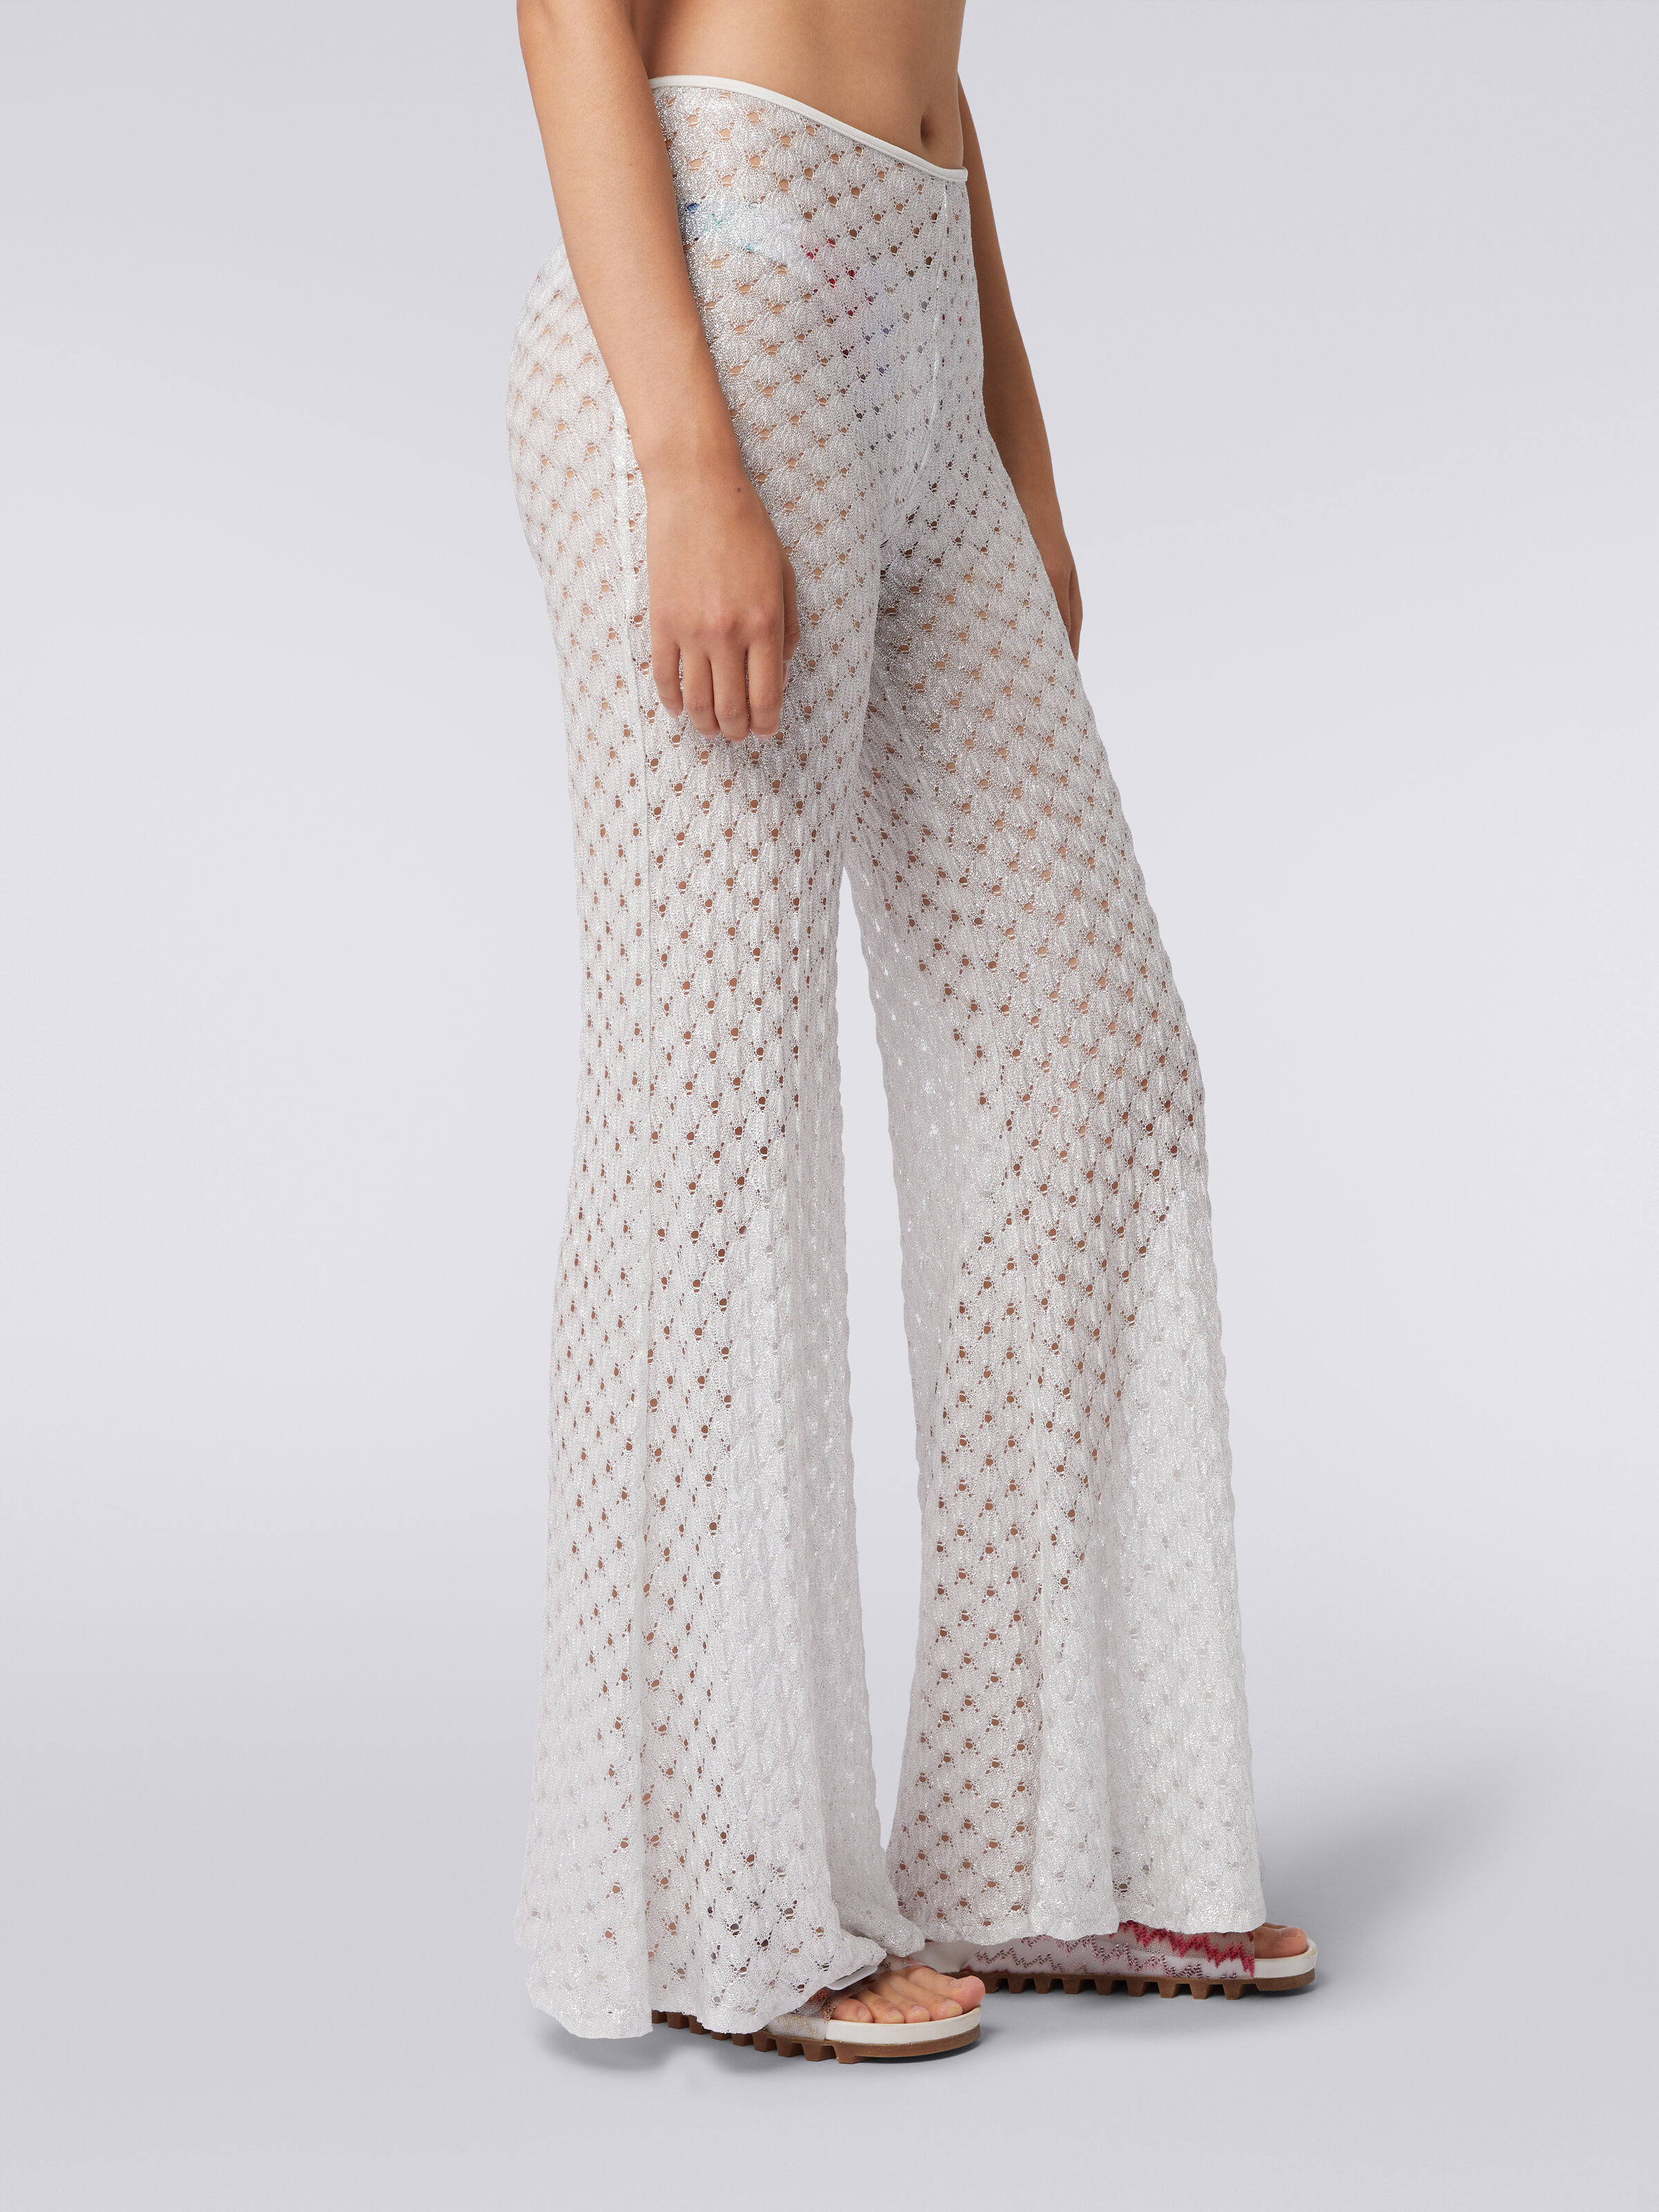 Lace-effect cover up trousers with flared hem, White  - 4